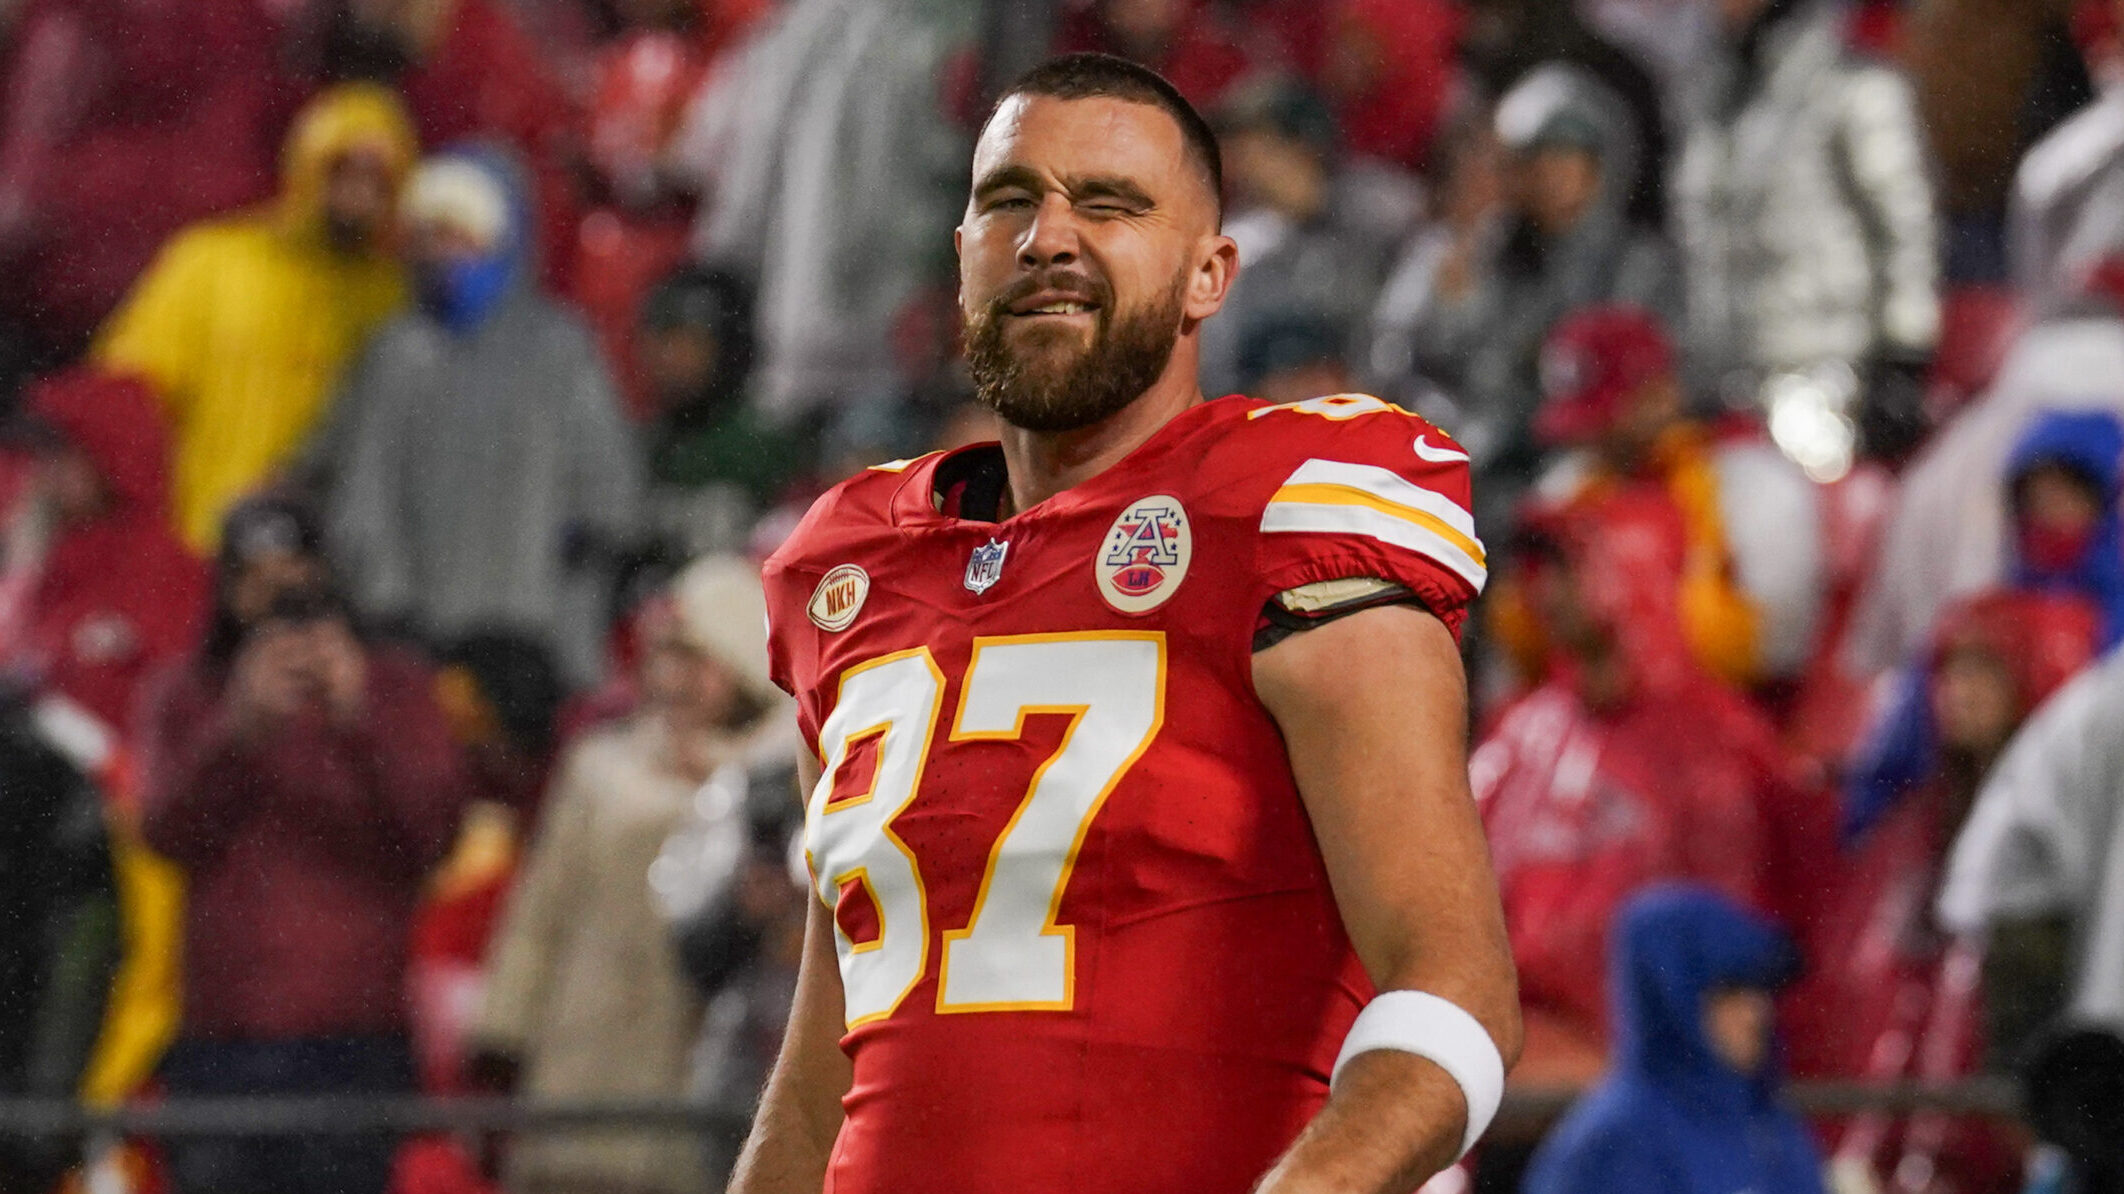 Kansas City Chiefs' tight end Travis Kelce winks at the camera.